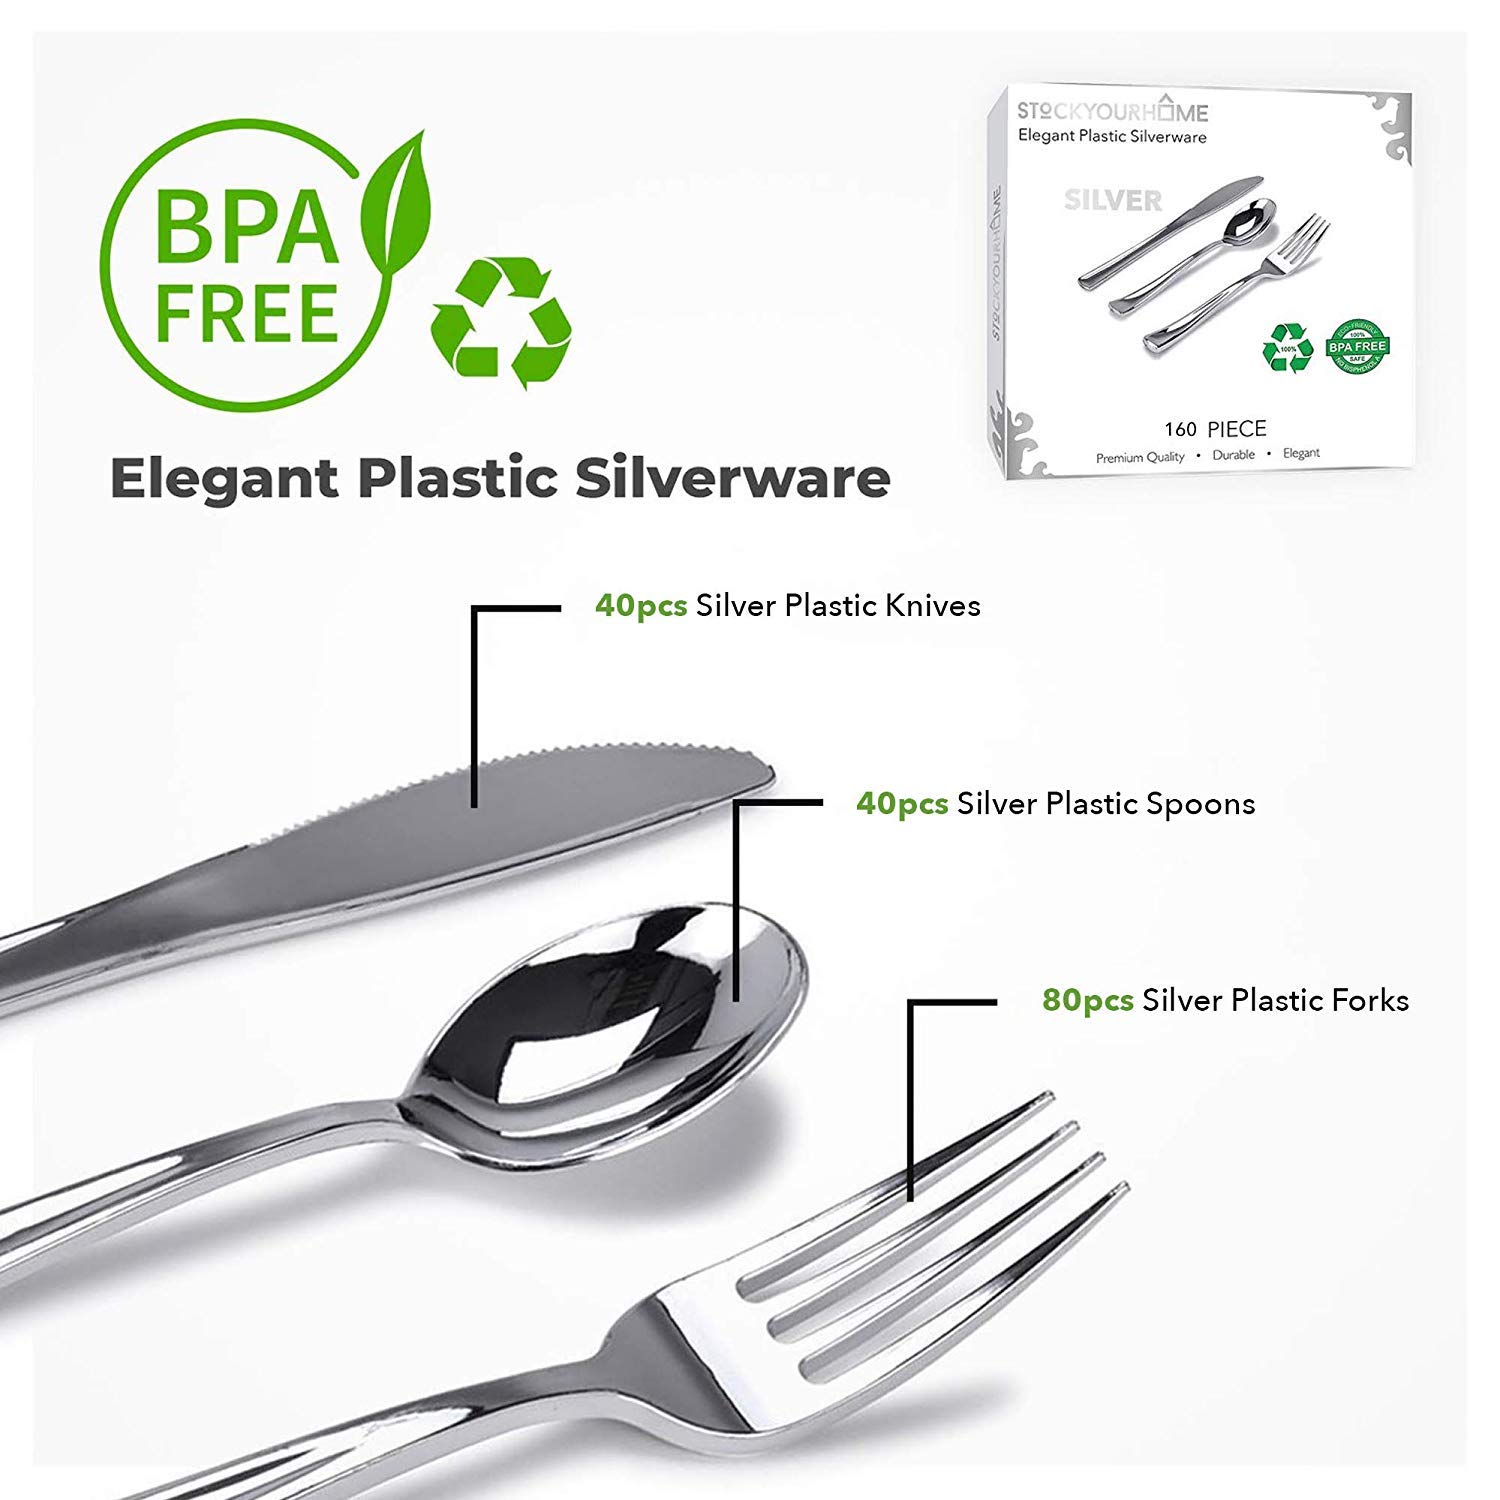 160 Pack Silver Plastic Cutlery Disposable Silverware - 80 Forks, 40 Knives, 40 Spoons - For Catering, Parties, Dinners, Weddings, and Everyday Use